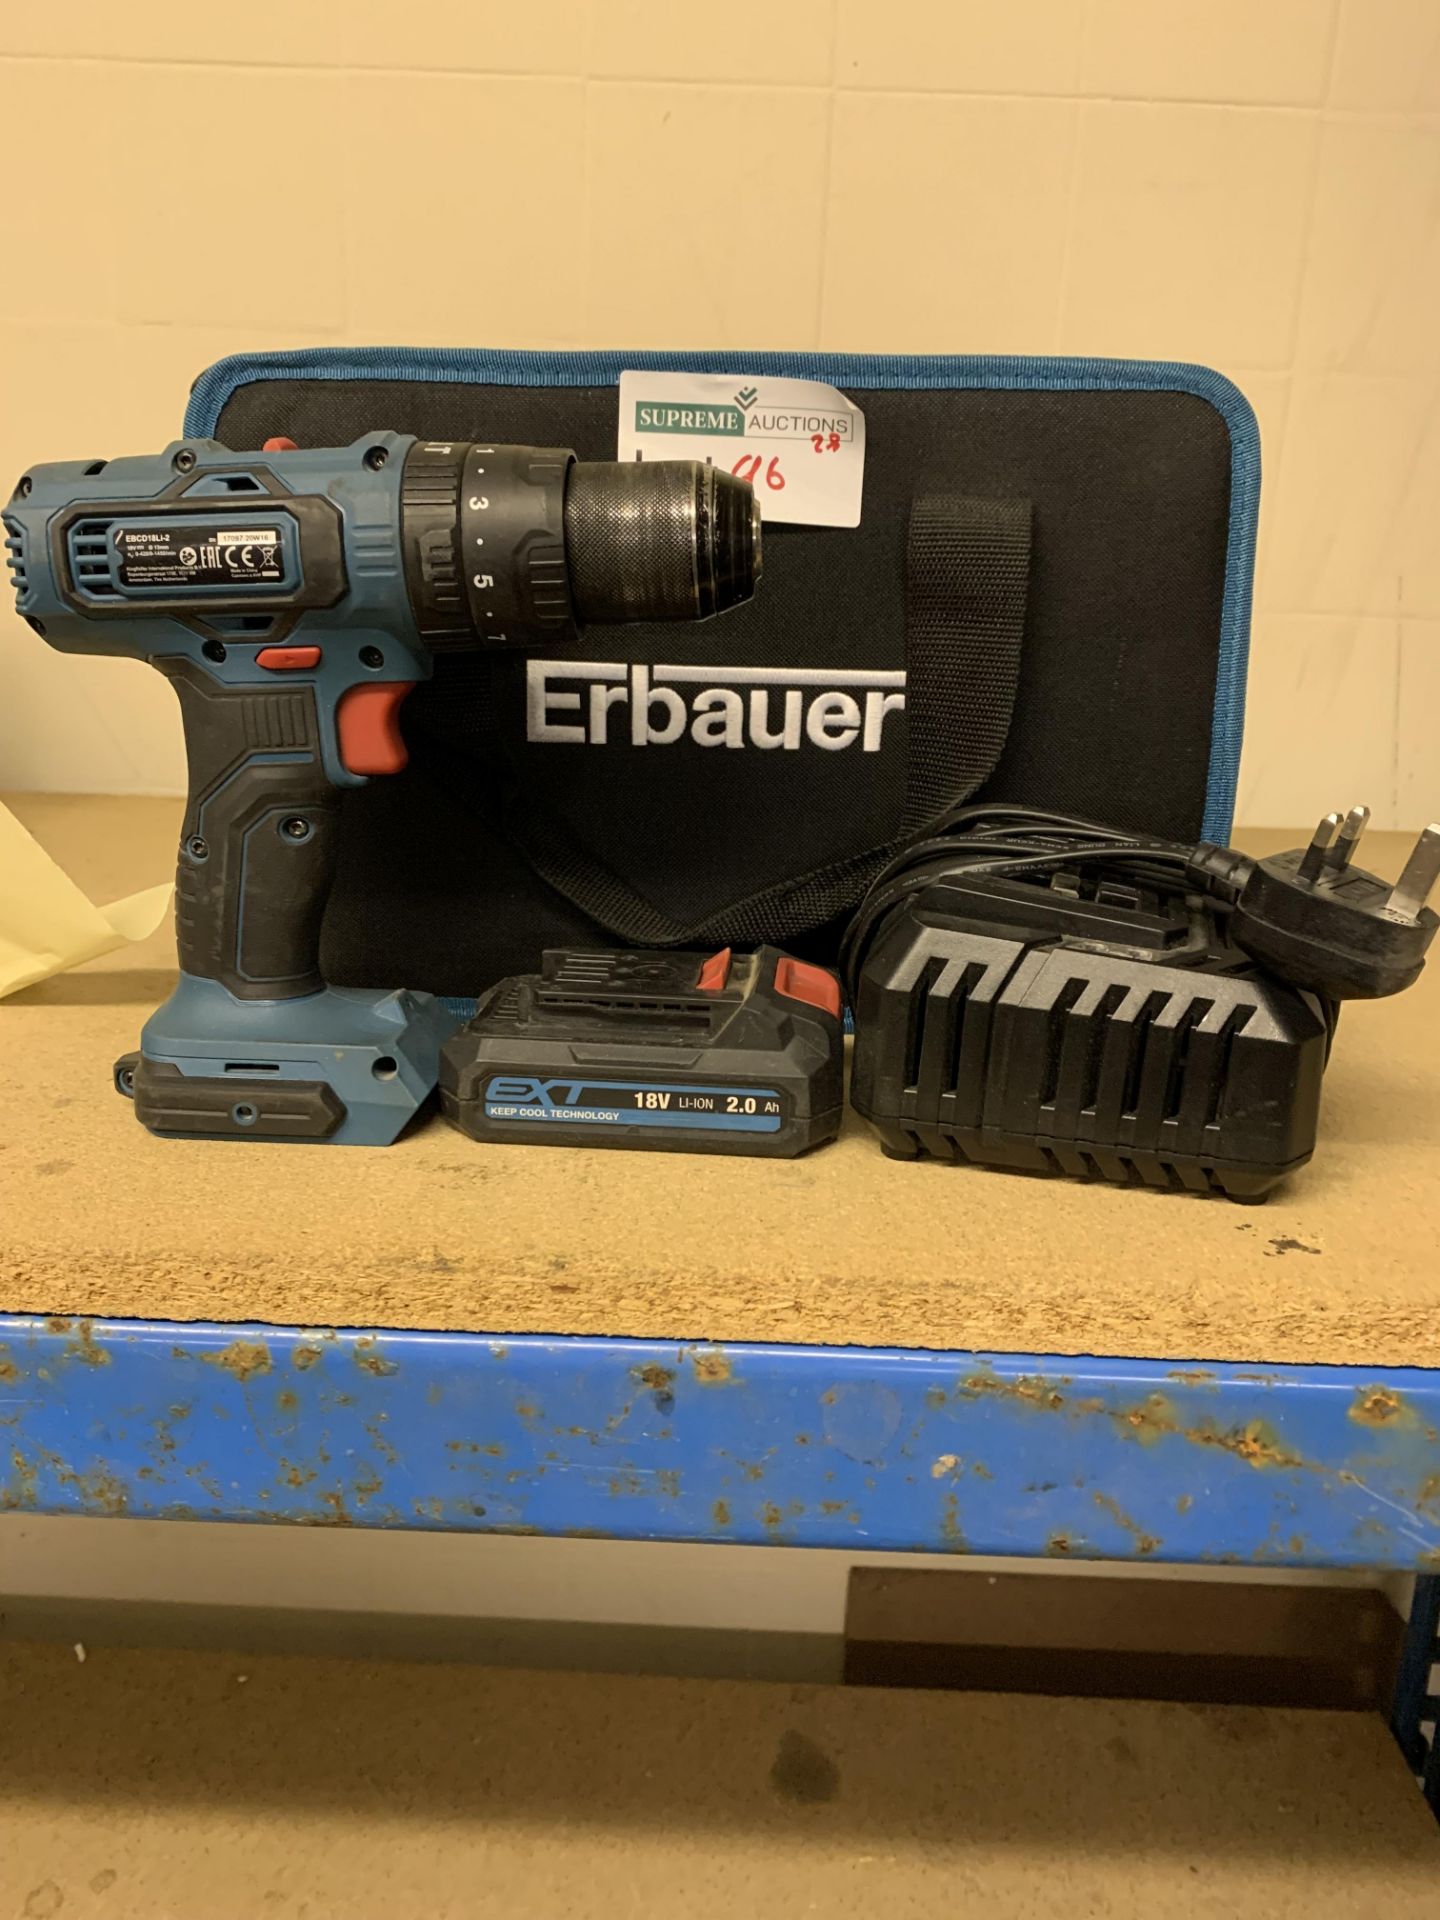 ERBAUER EBCD18LI-2 18V 2.0AH LI-ION EXT CORDLESS COMBI DRILL COMES WITH BATTERY, CHARGER AND CARRY